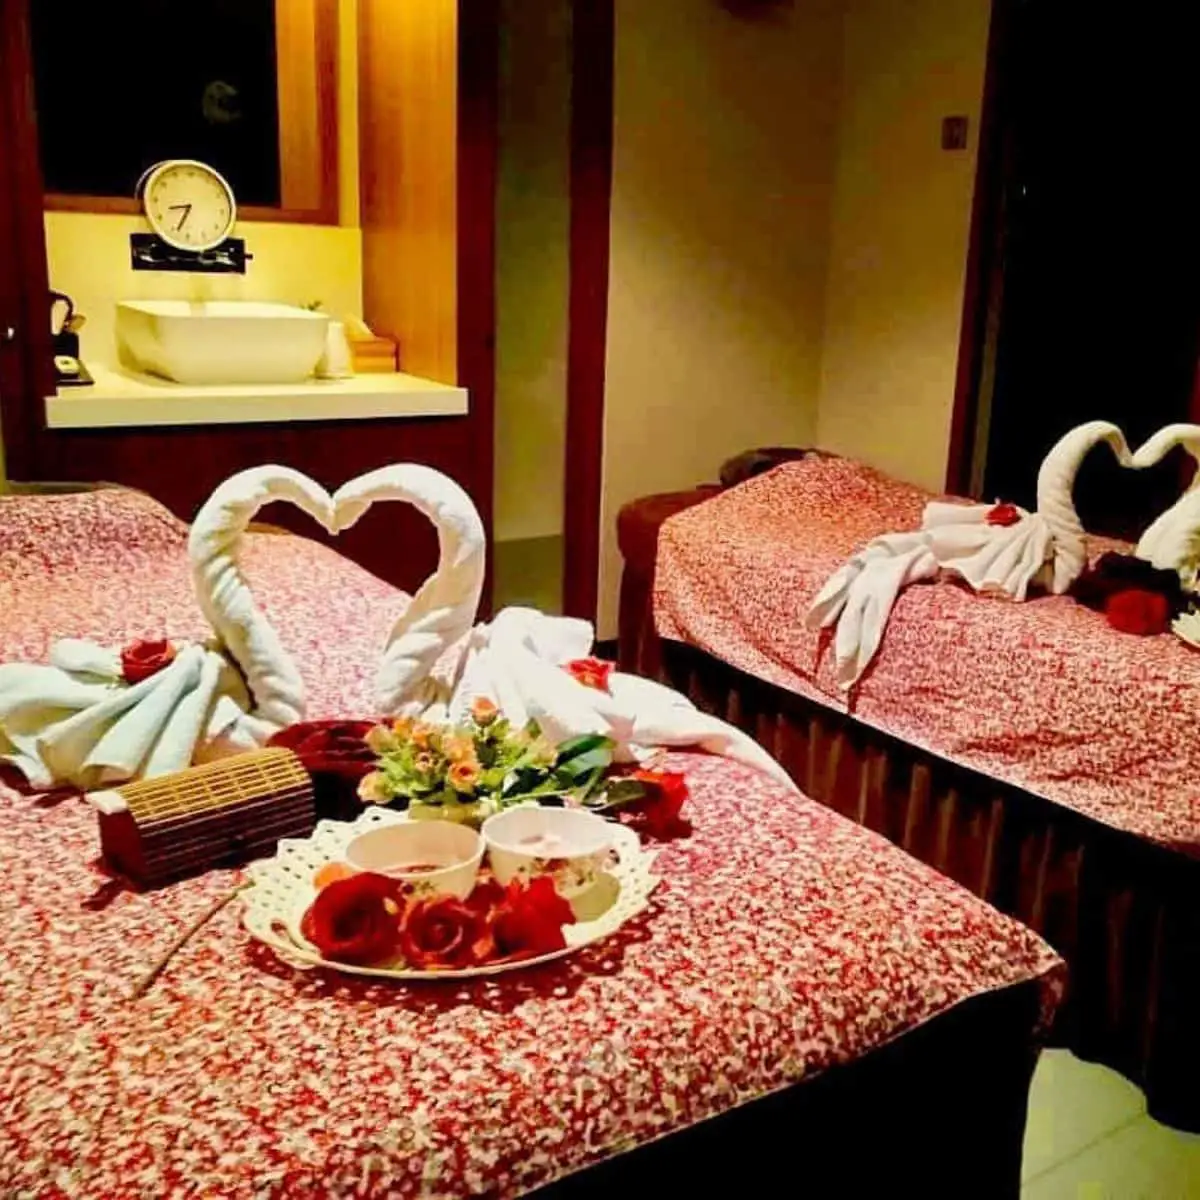 Penang Danai Spa room with a romantic setting ideal for couple body massages